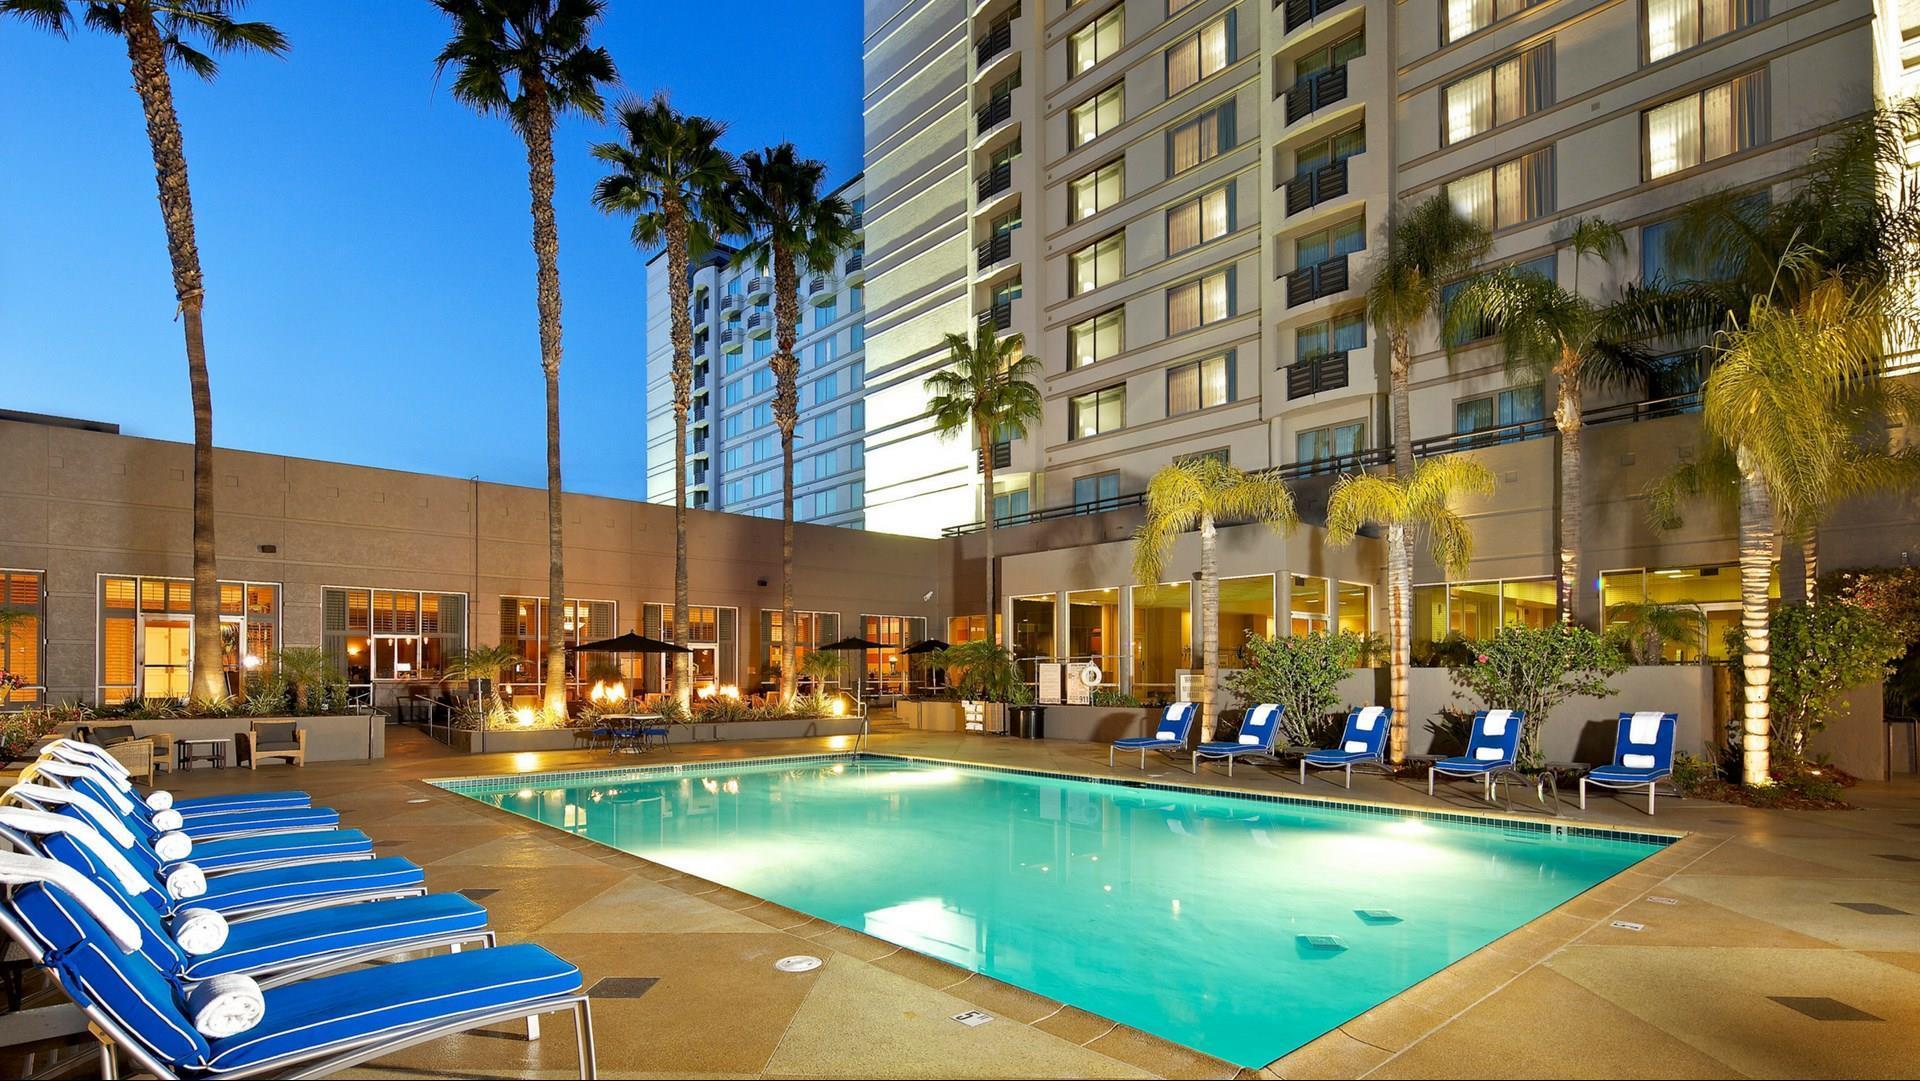 DoubleTree by Hilton Hotel San Diego - Mission Valley in San Diego, CA